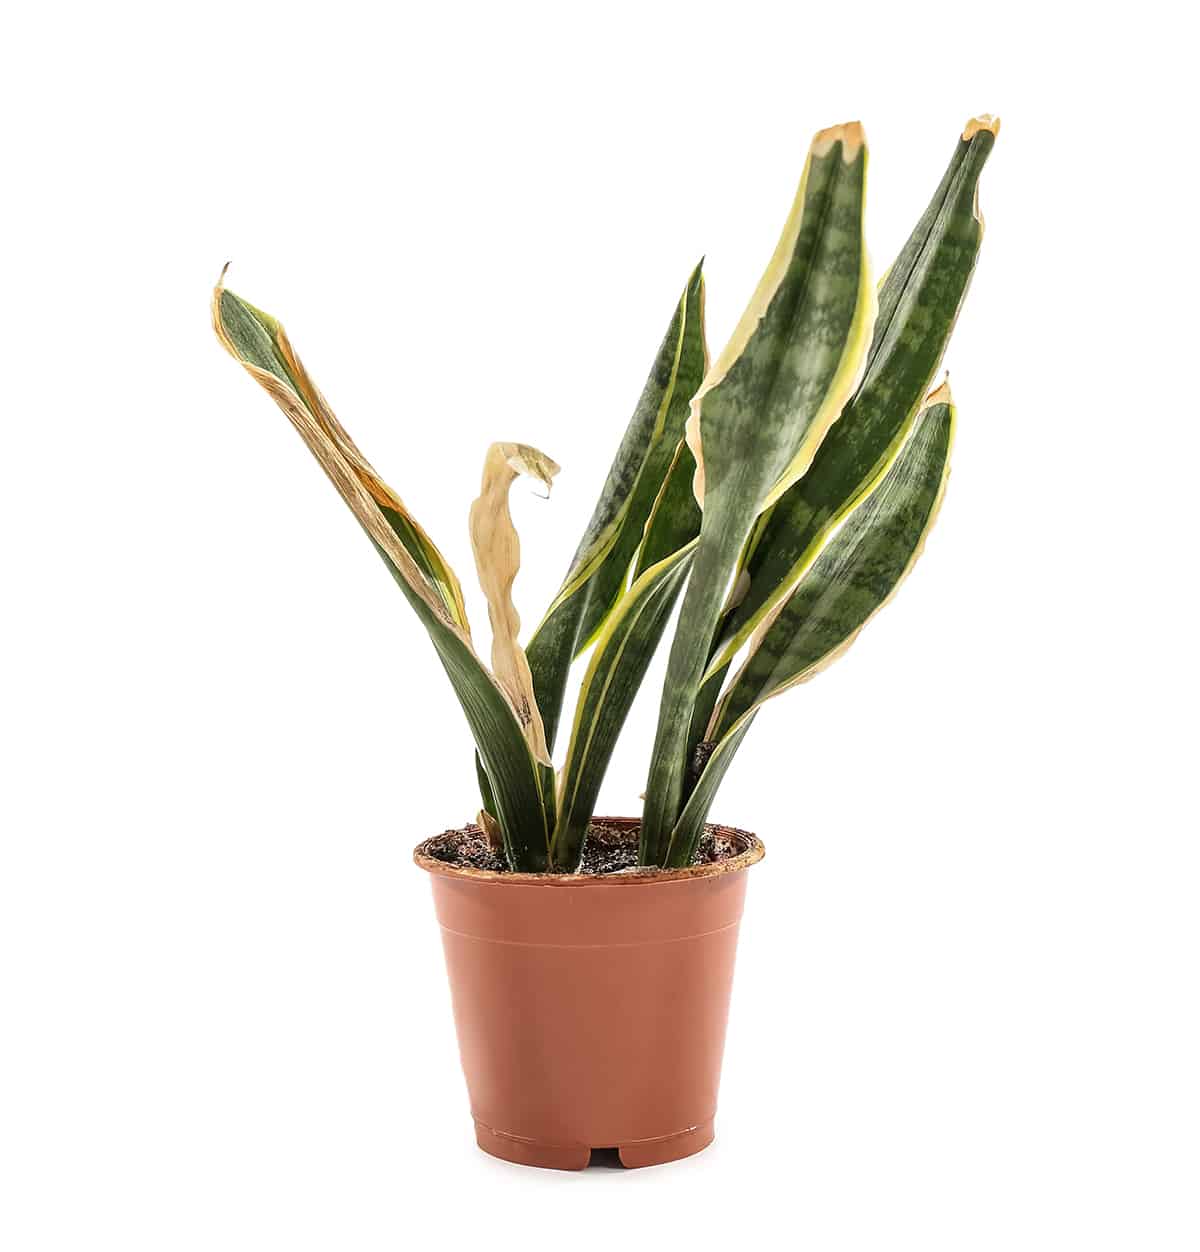 Signs of Too Much Water in Snake Plants